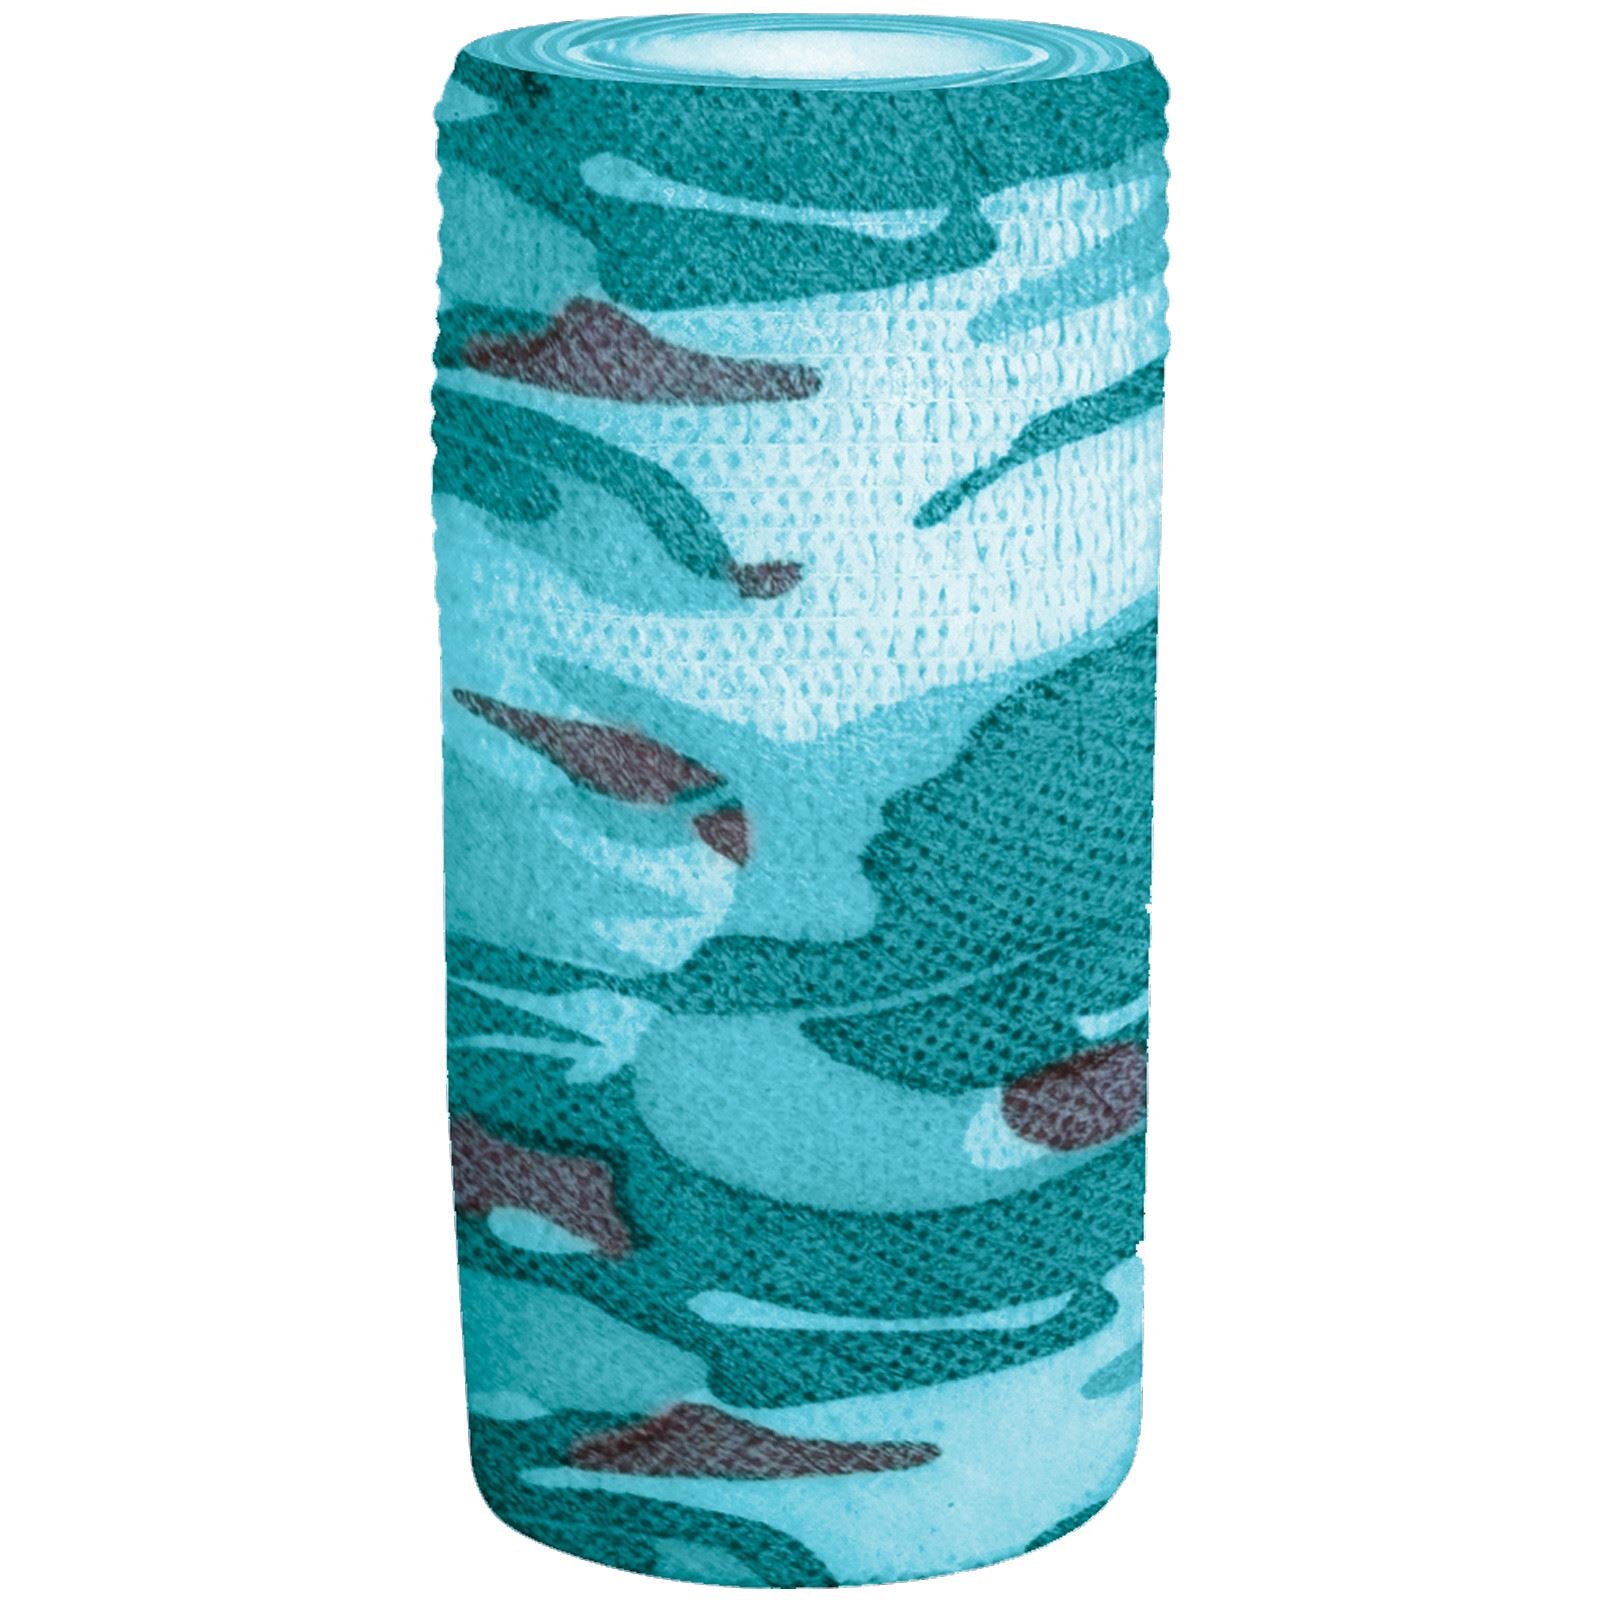 Perry Equestrian 100mm x 4.5m Cohesive Bandage (Blue Camouflage) - Just Horse Riders